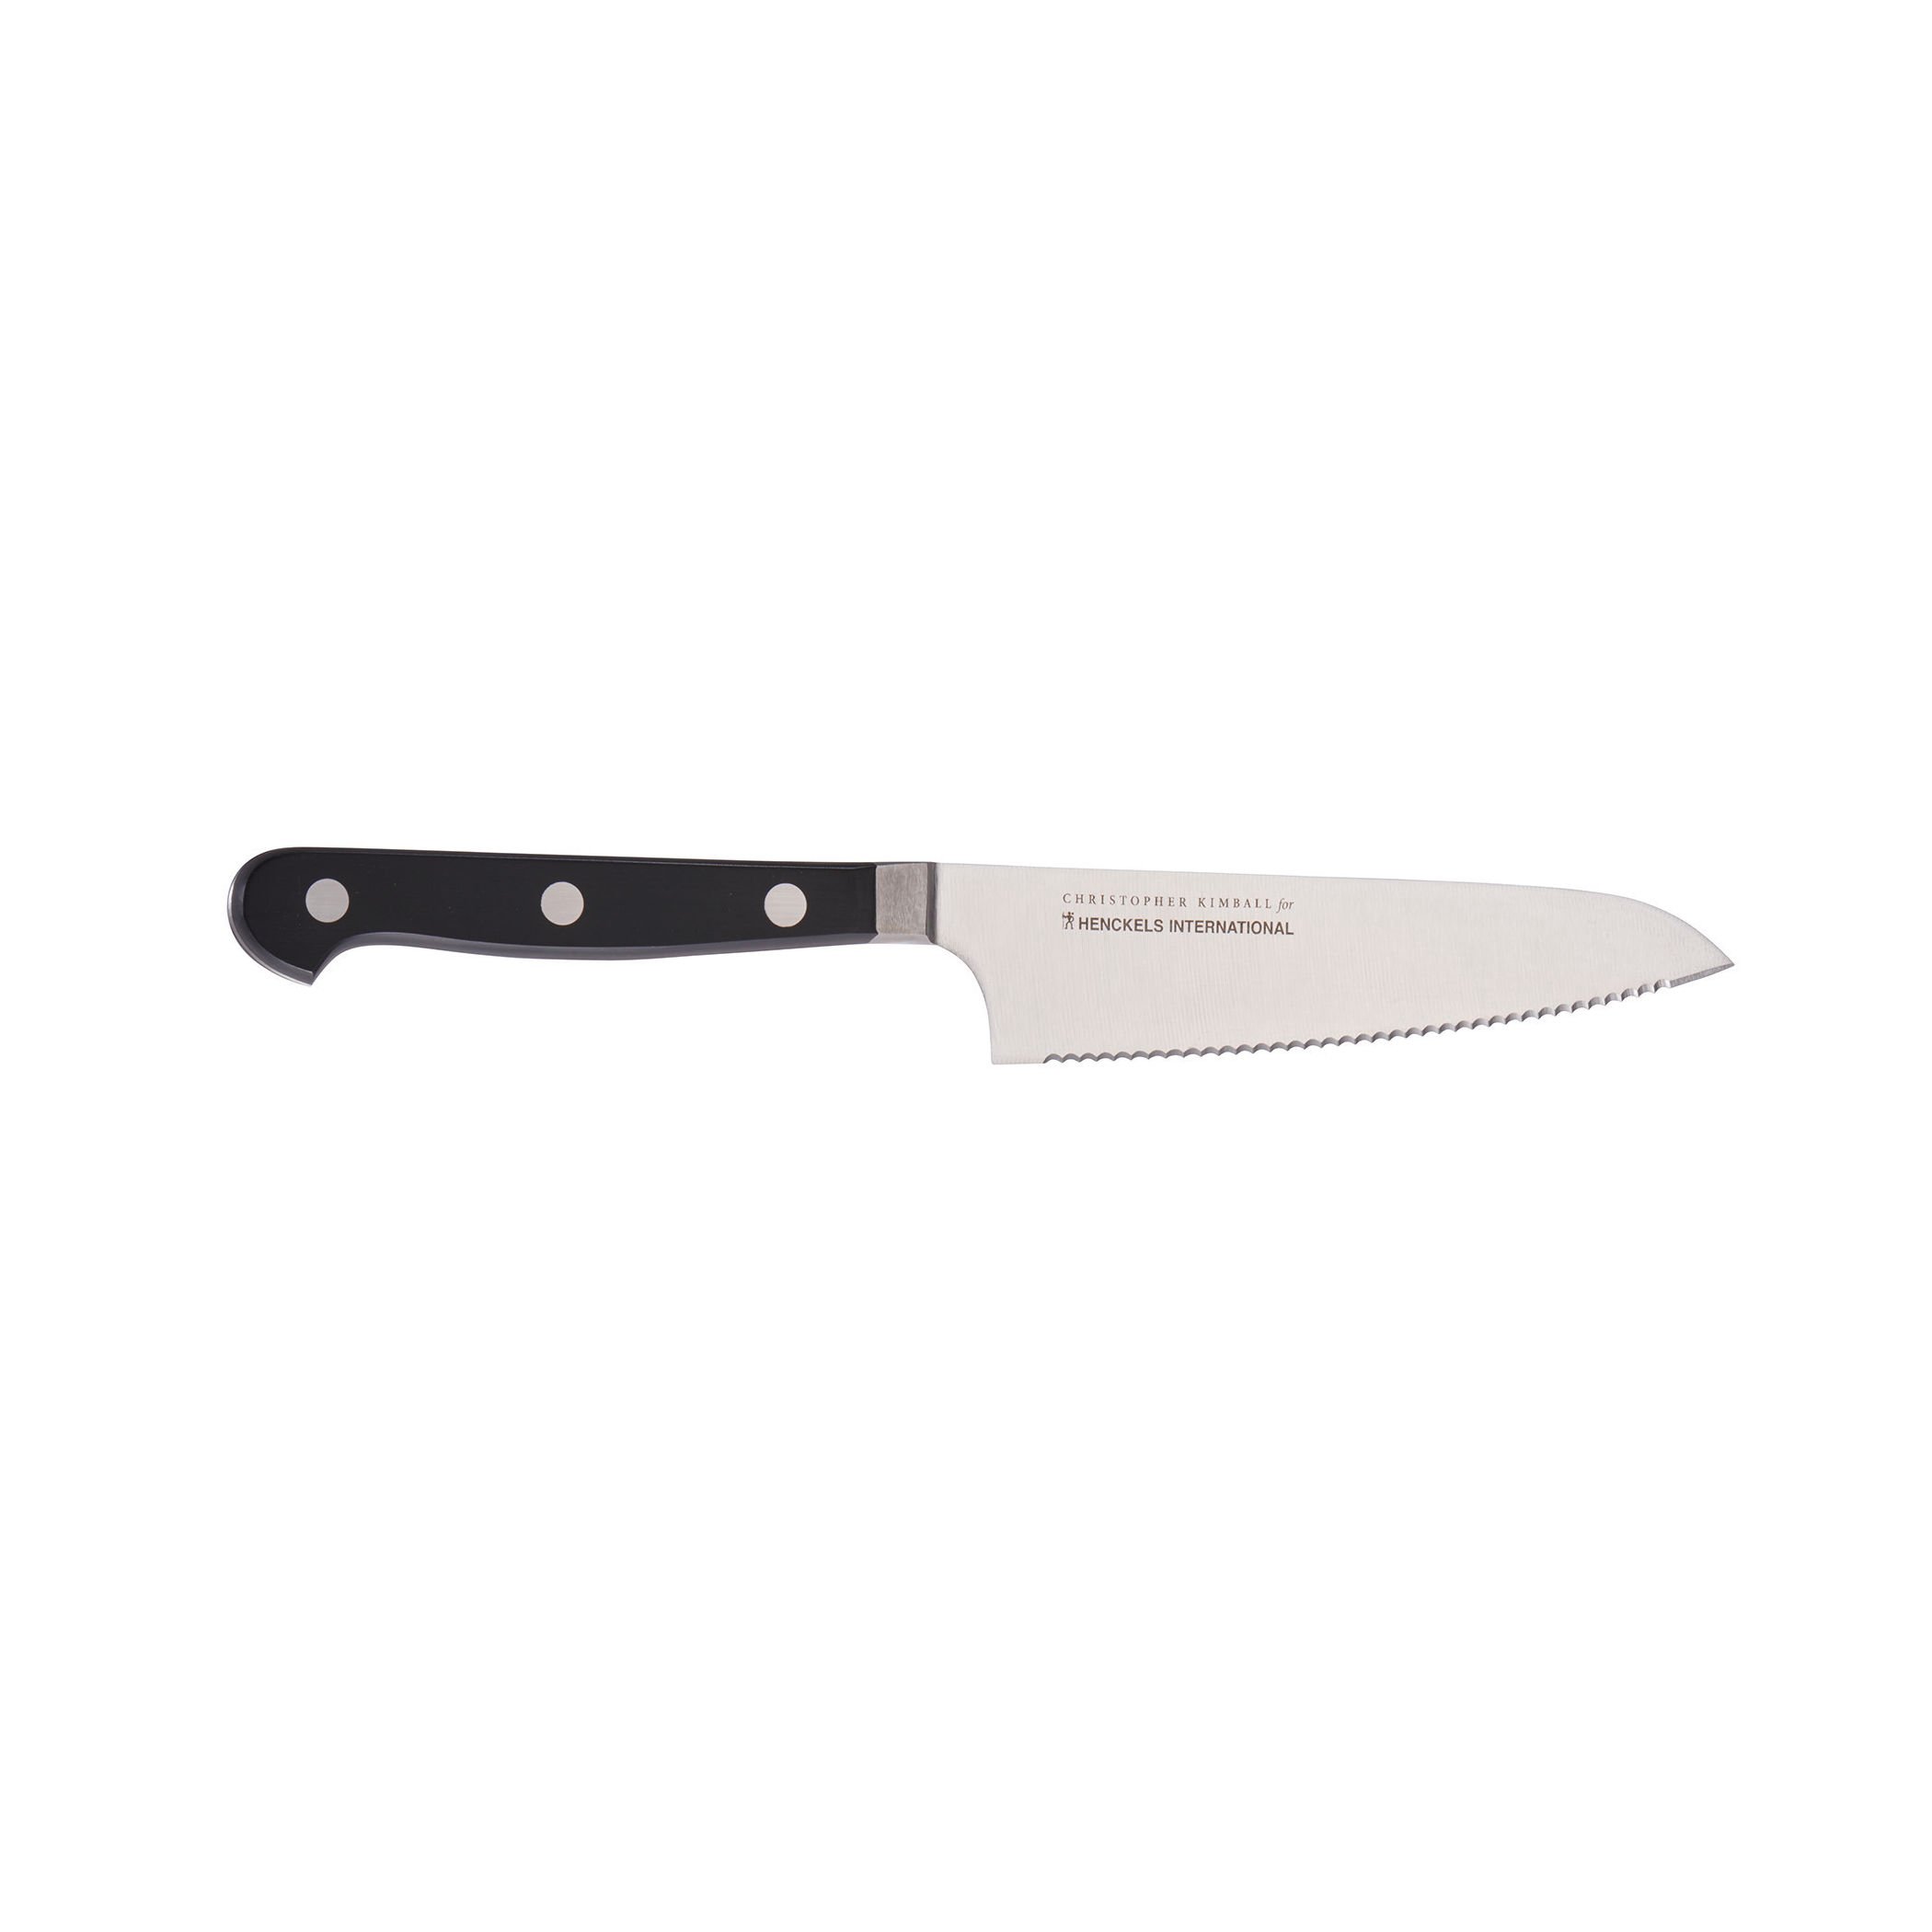 Henckels CLASSIC Christopher Kimball 4-inch Paring Knife, 4-inch